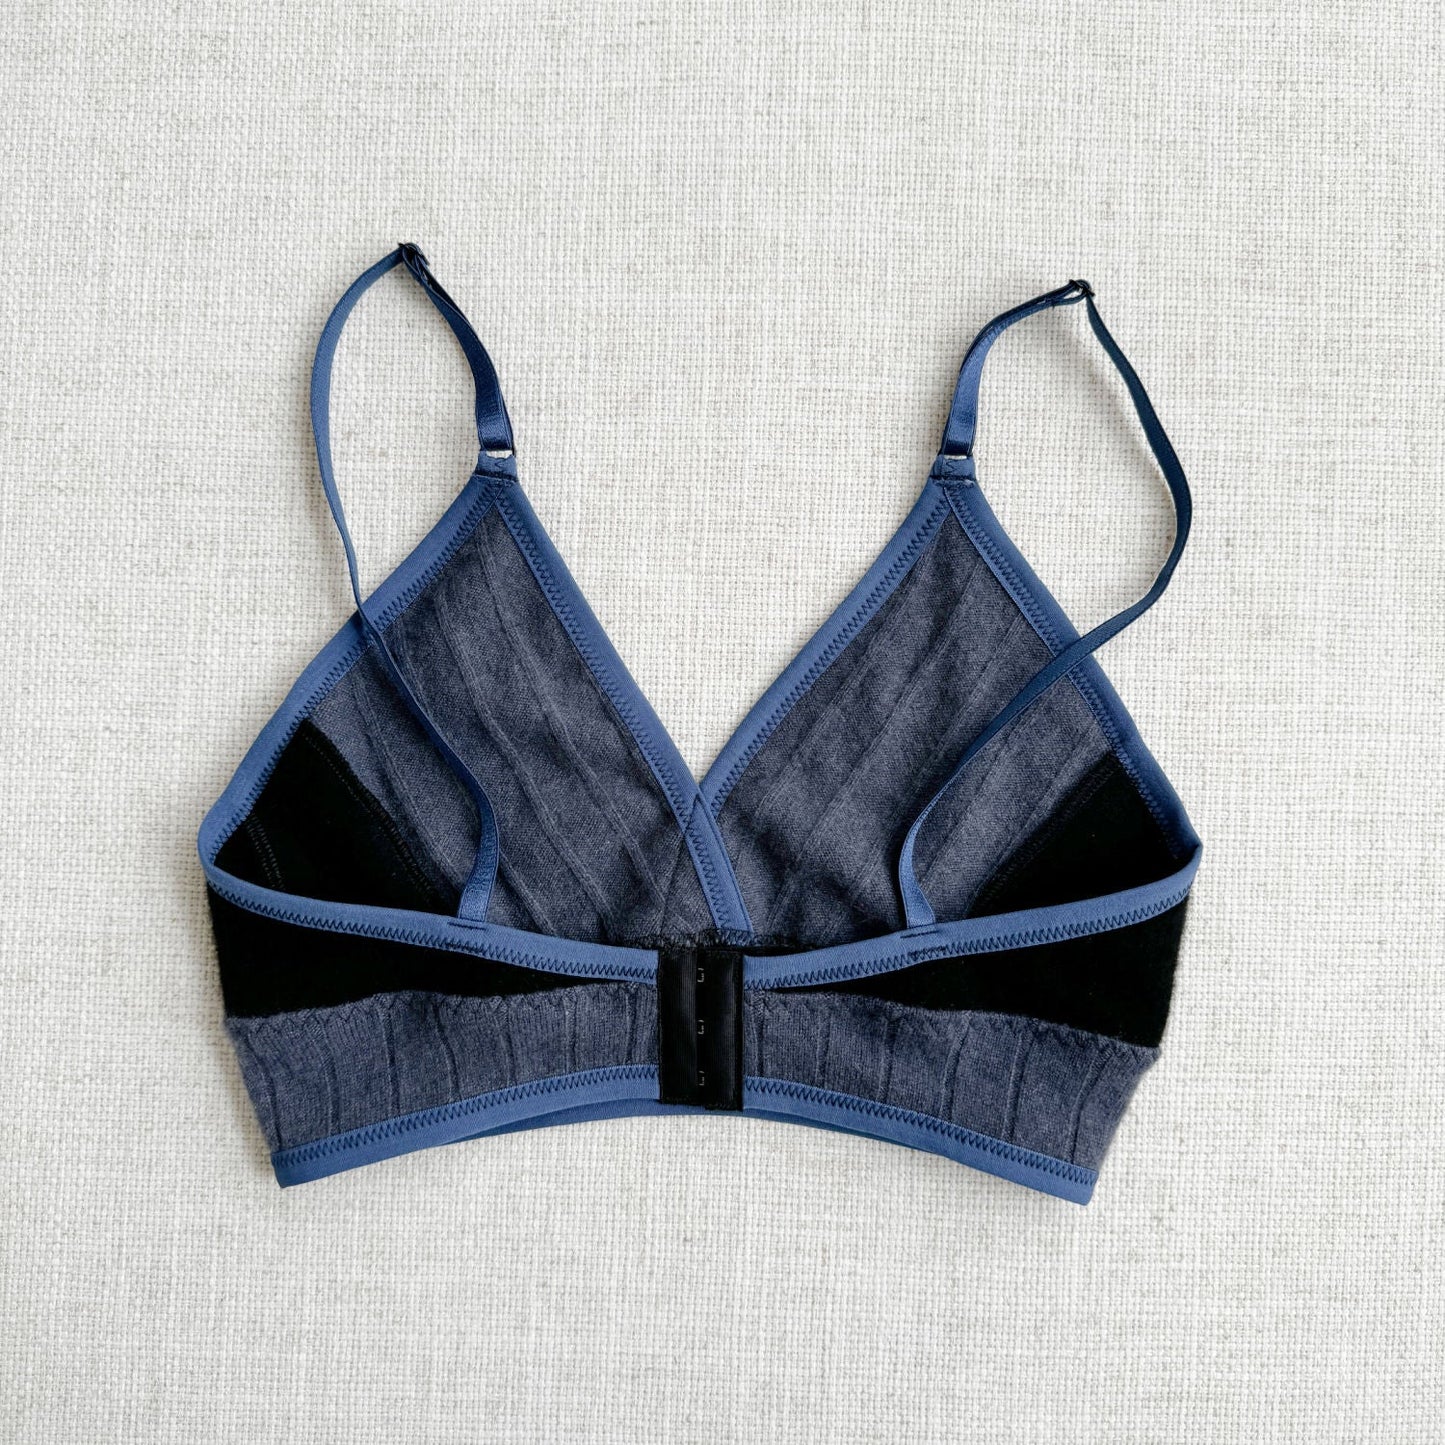 100% cashmere long bra top, classic Black with Dusty Blue highlights, made by Econica, Canadian craftsmanship, luxurious feel, sophisticated color combination, handcrafted with care, sustainable luxury, comfortable fit, modern design, natural insulation, artisanal fashion